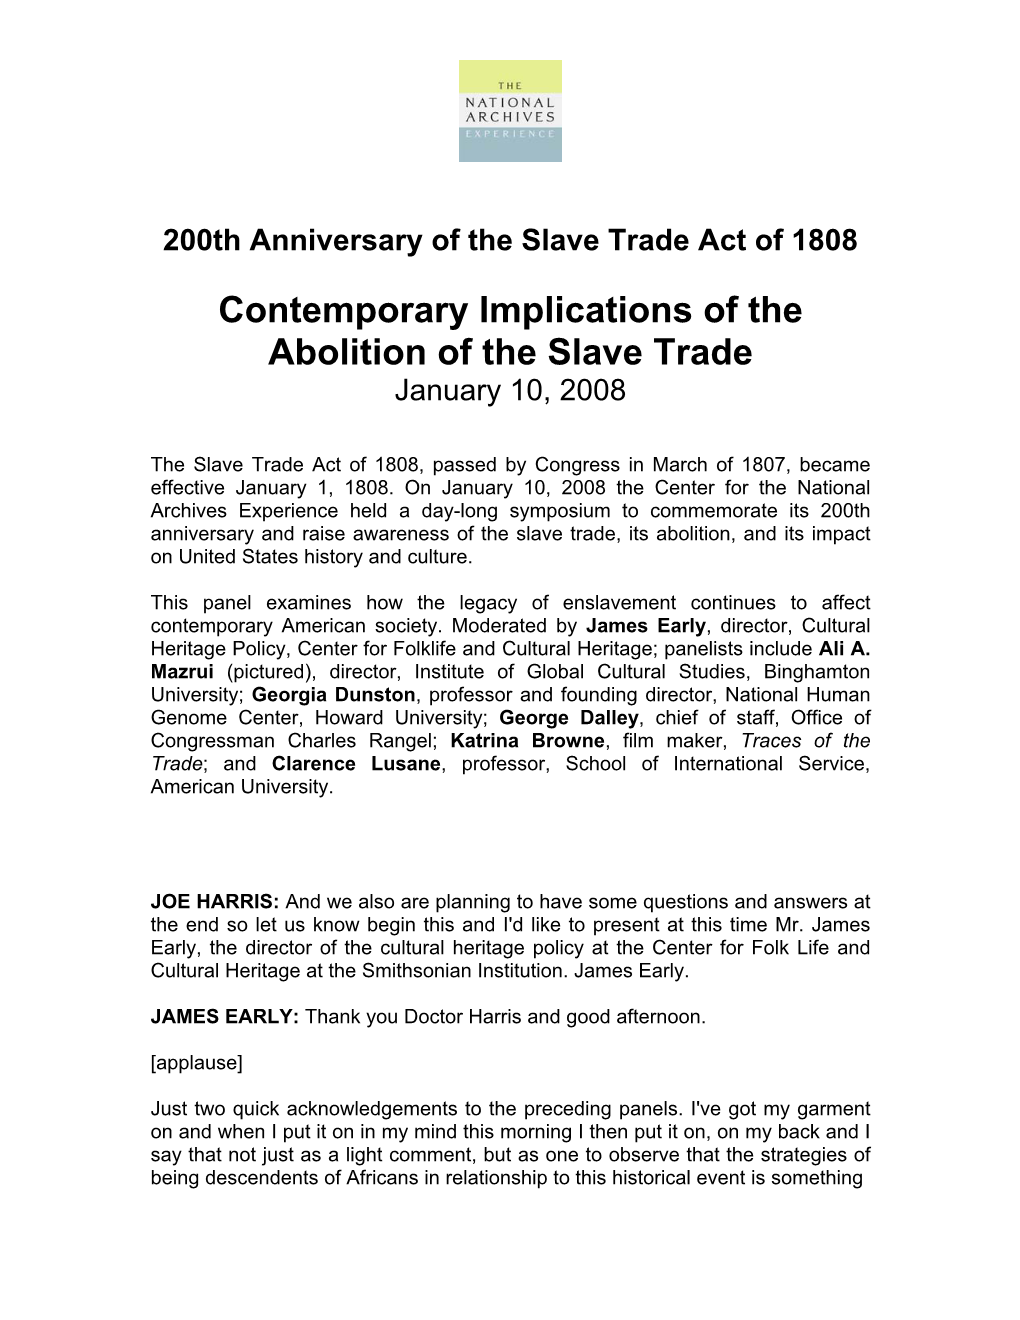 Contemporary Implications of the Abolition of the Slave Trade January 10, 2008